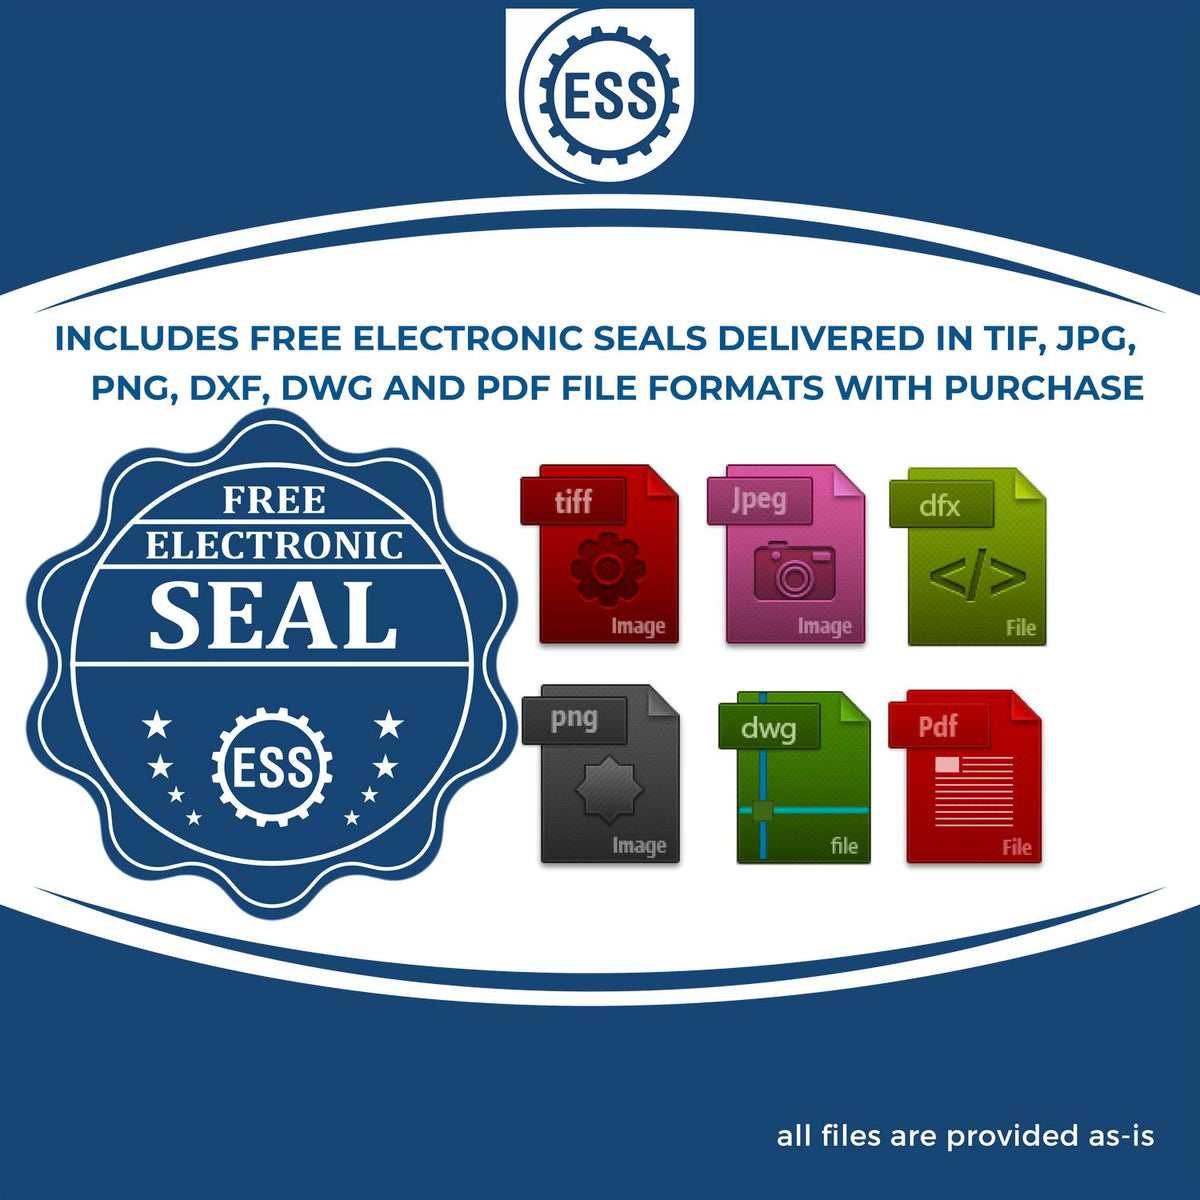 An infographic for the free electronic seal for the Hybrid Idaho Engineer Seal illustrating the different file type icons such as DXF, DWG, TIF, JPG and PNG.